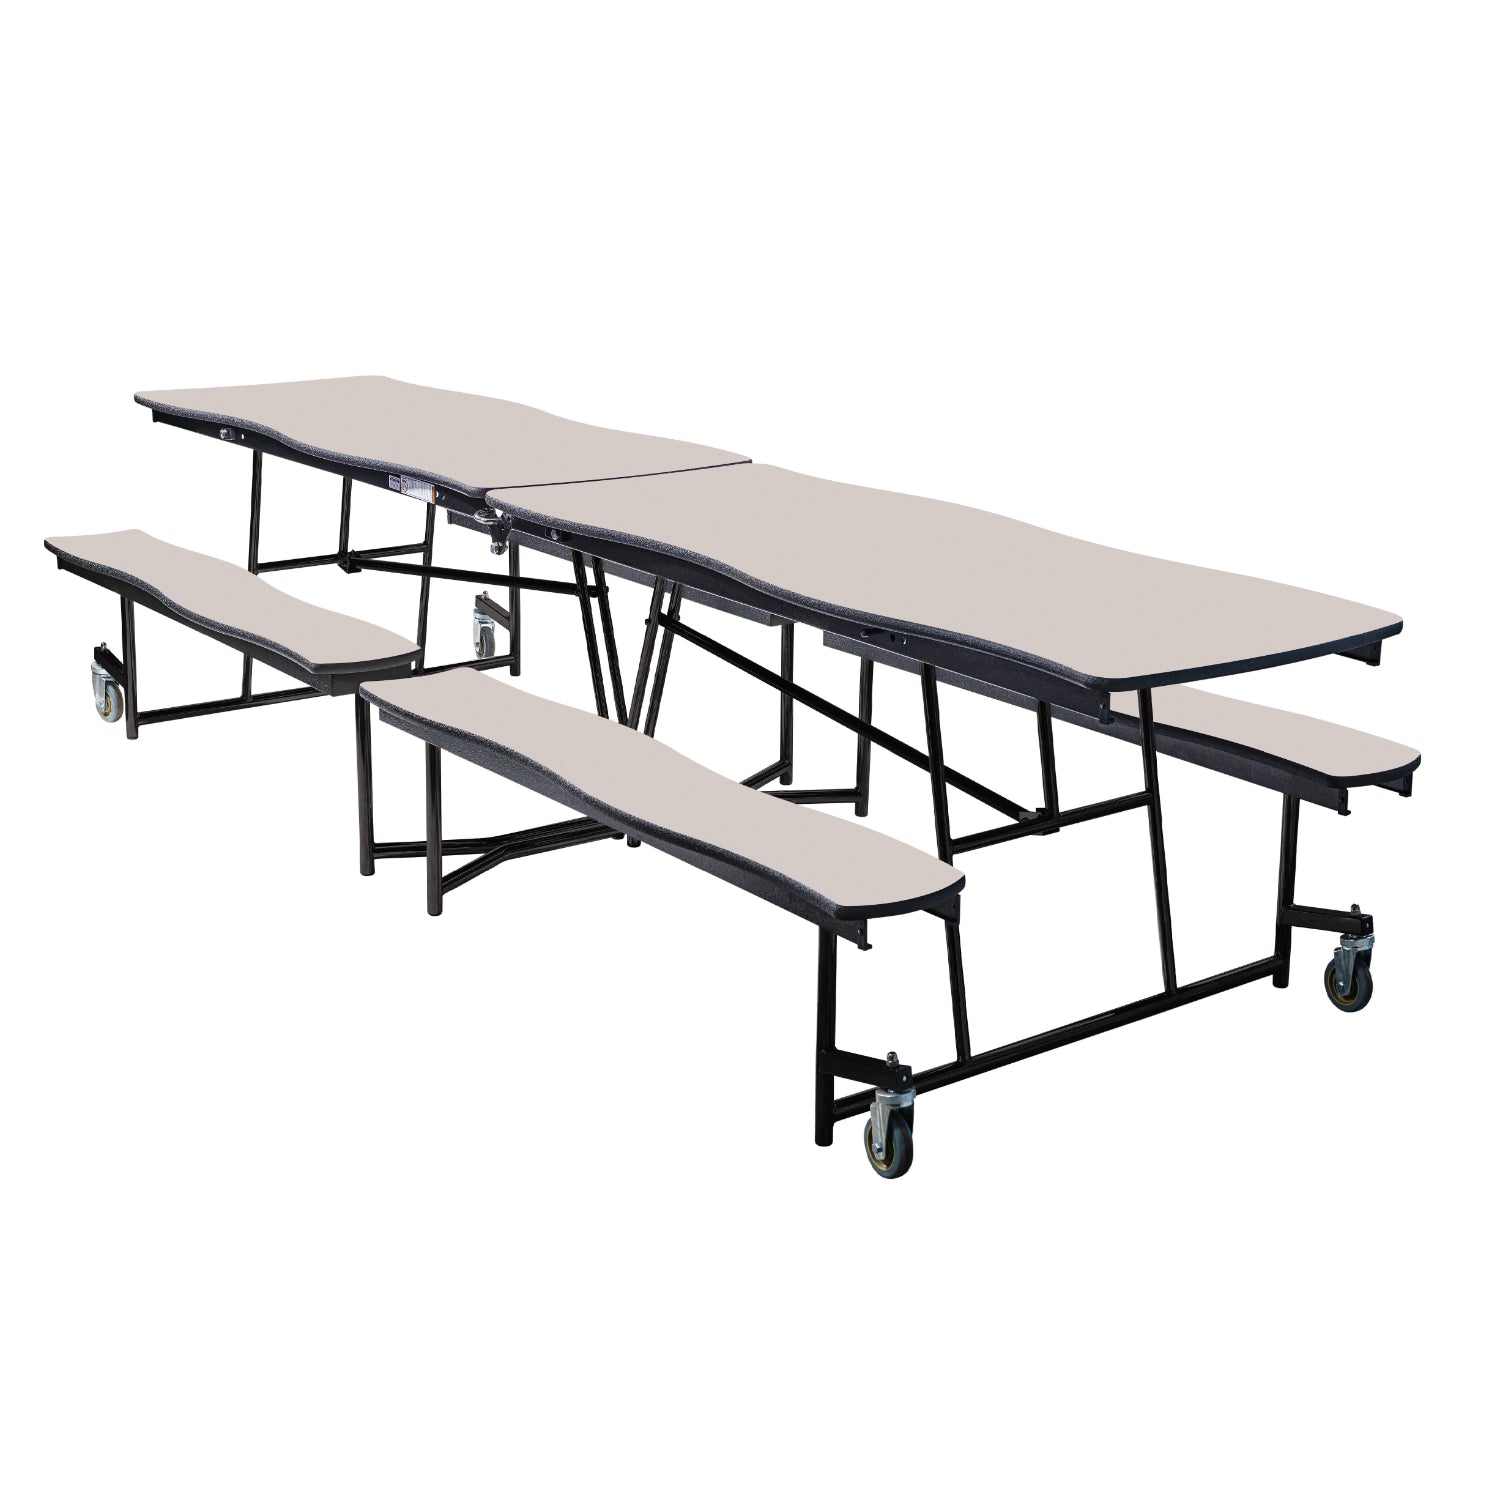 Mobile Cafeteria Table with Benches, 8' Swerve, Particleboard Core, Vinyl T-Mold Edge, Textured Black Frame